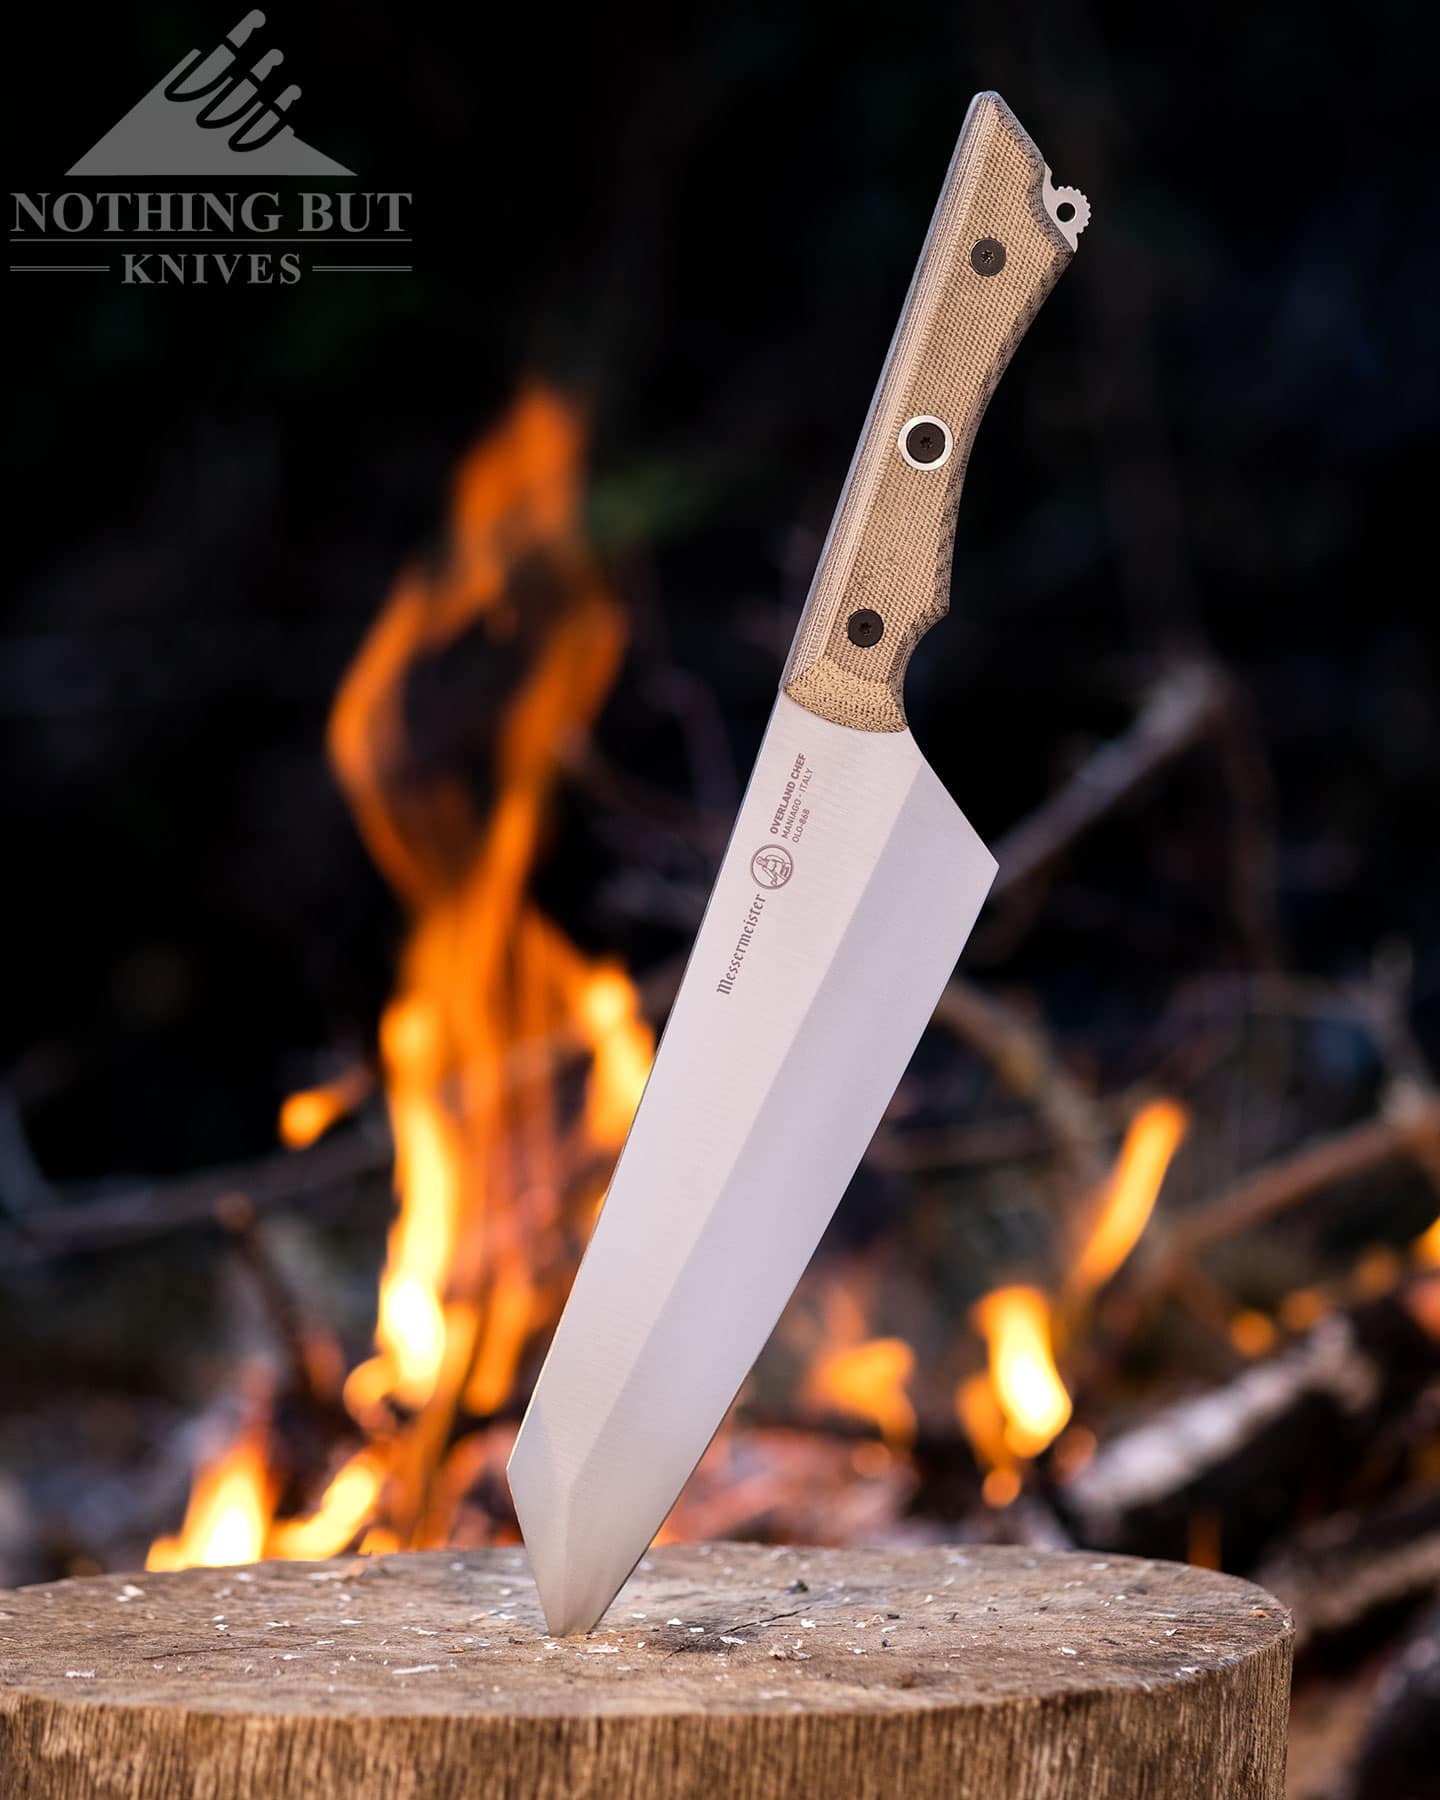 The Best Chef Knife Sets and Camping Knives and Tools by DFACKTO